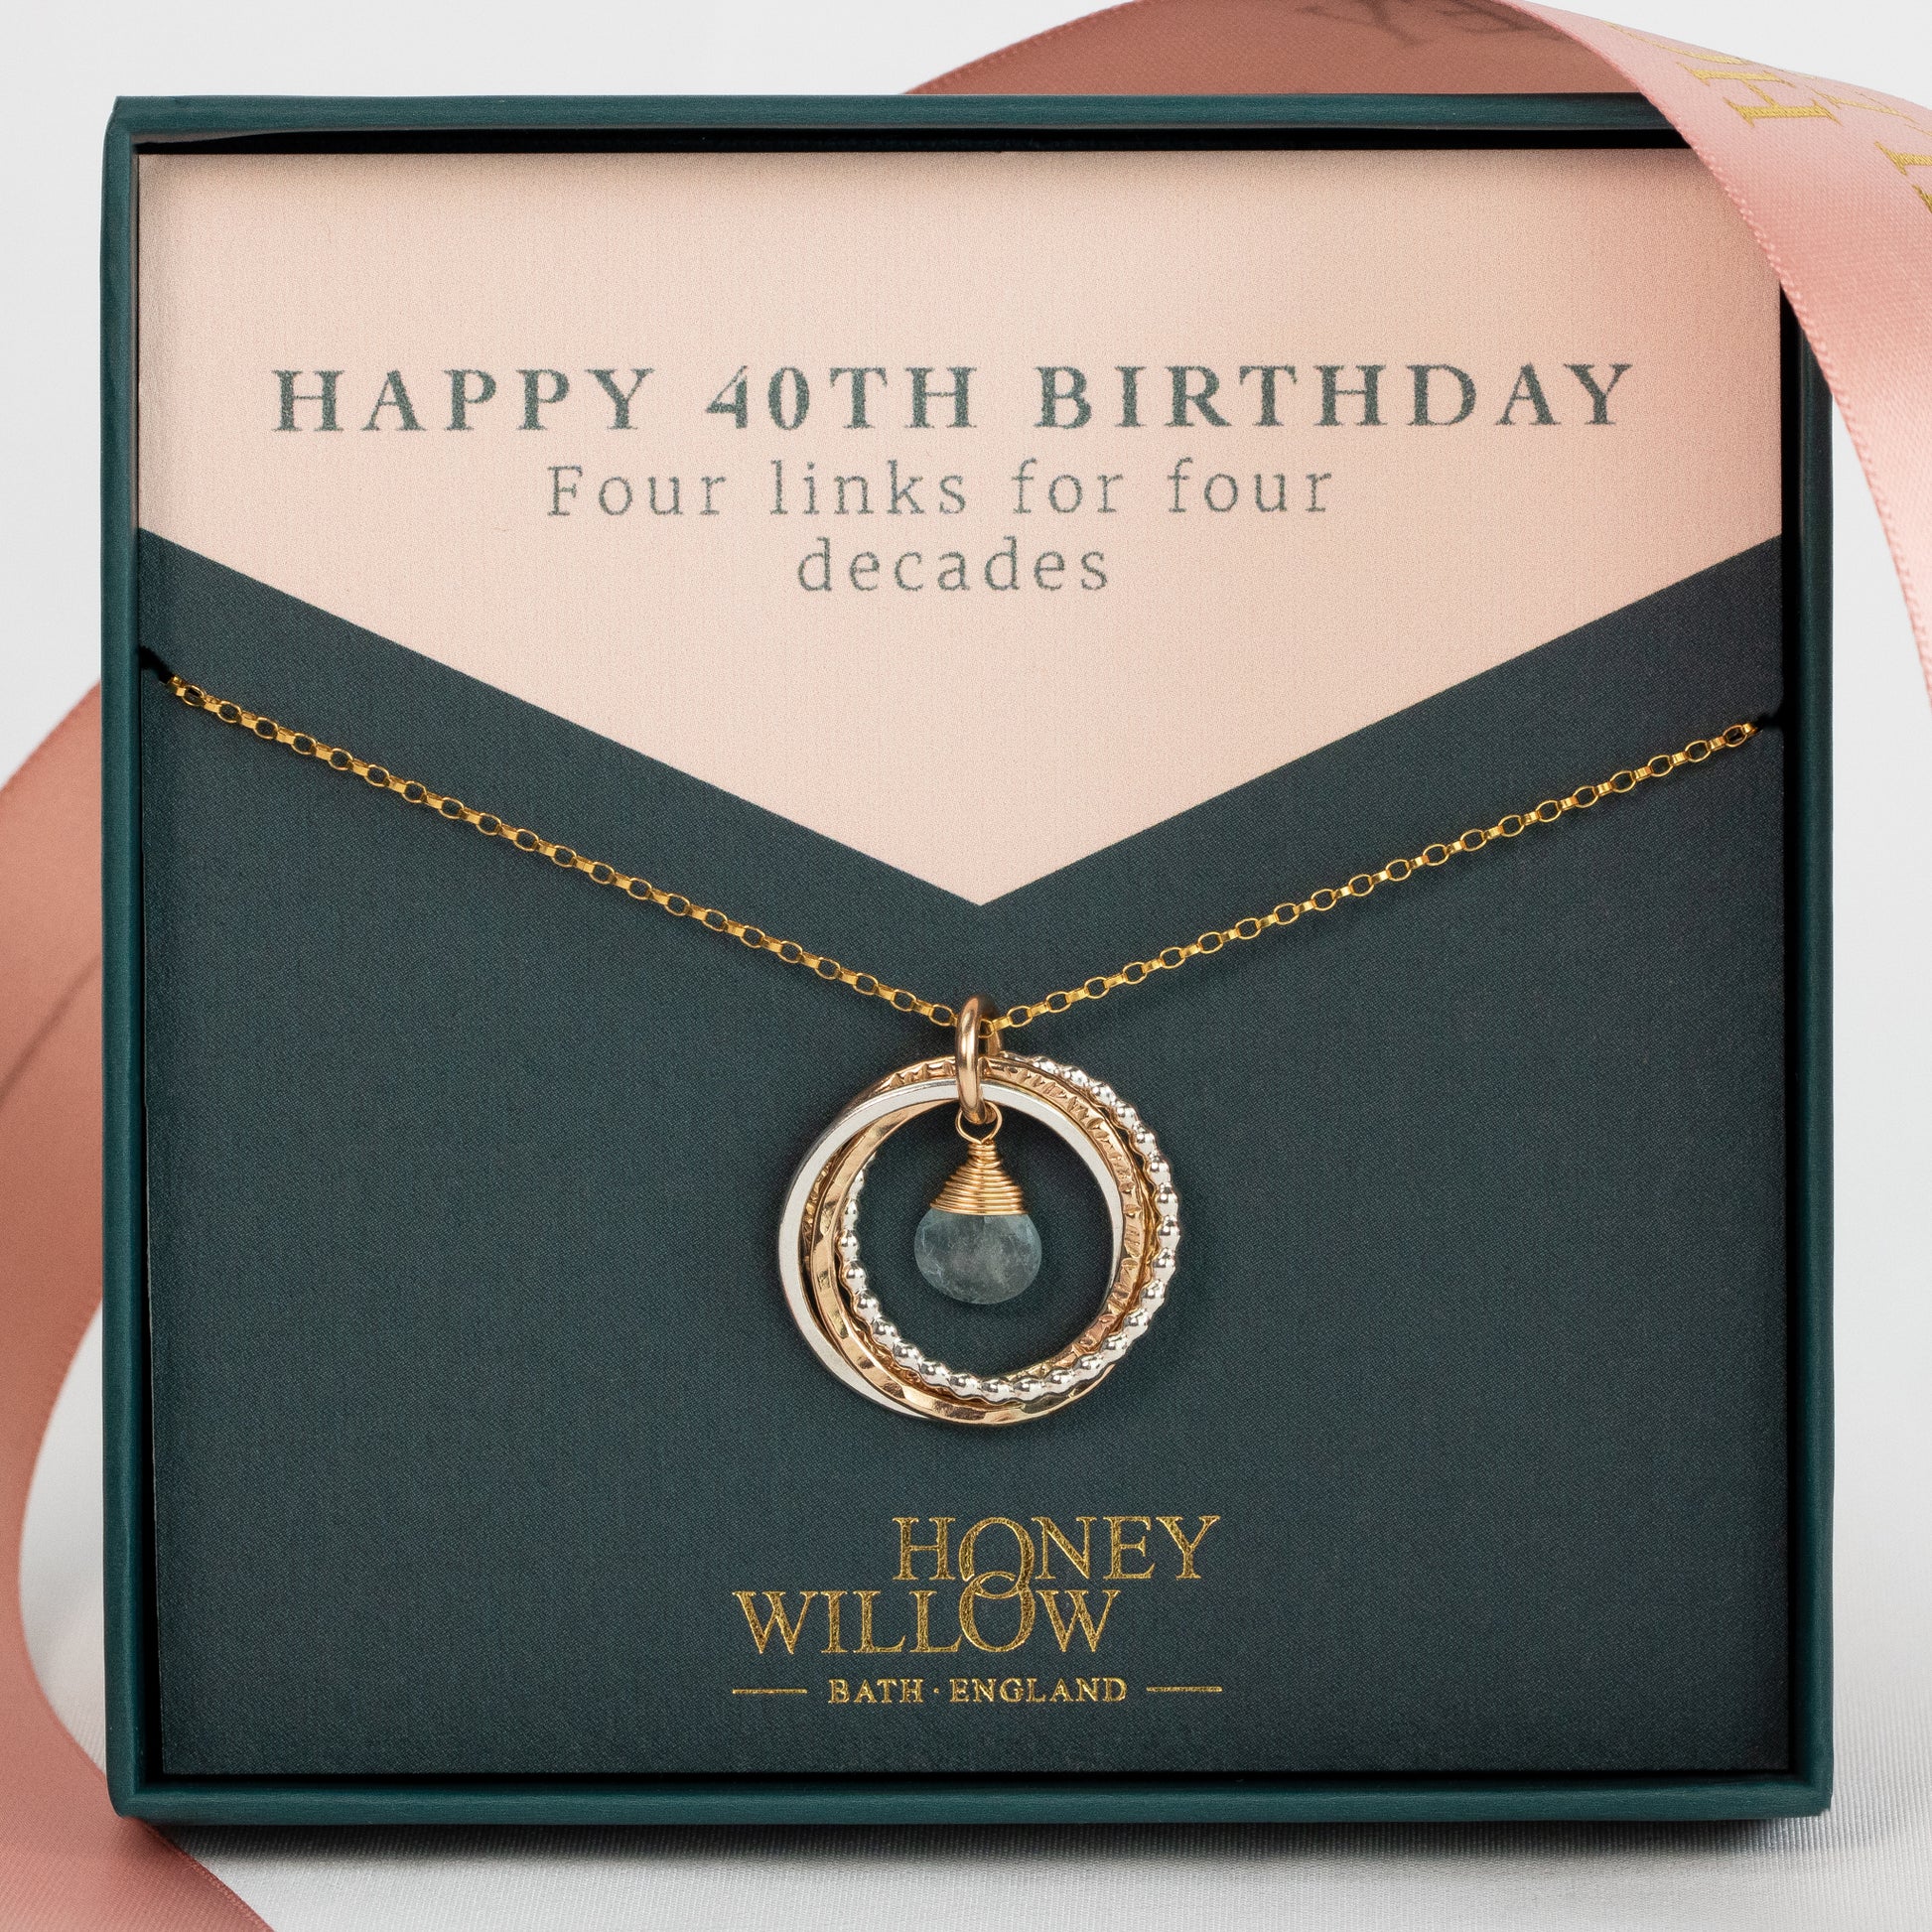 40th Birthday Birthstone Necklace - The Original 4 Links for 4 Decades Necklace - Silver & Gold